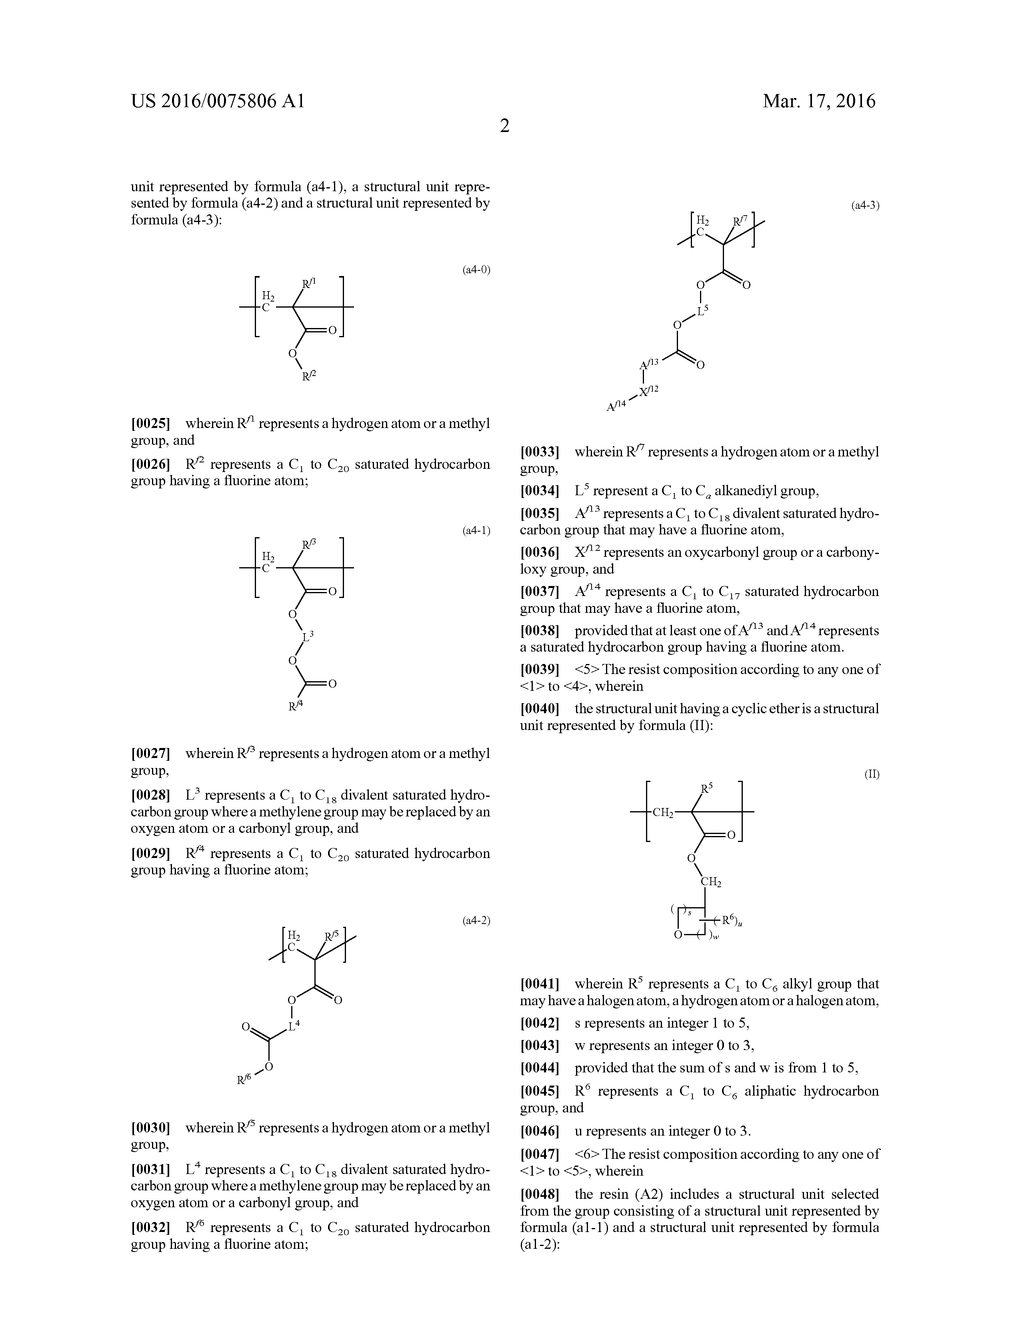 RESIN, RESIST COMPOSITION AND METHOD FOR PRODUCING RESIST PATTERN - diagram, schematic, and image 04